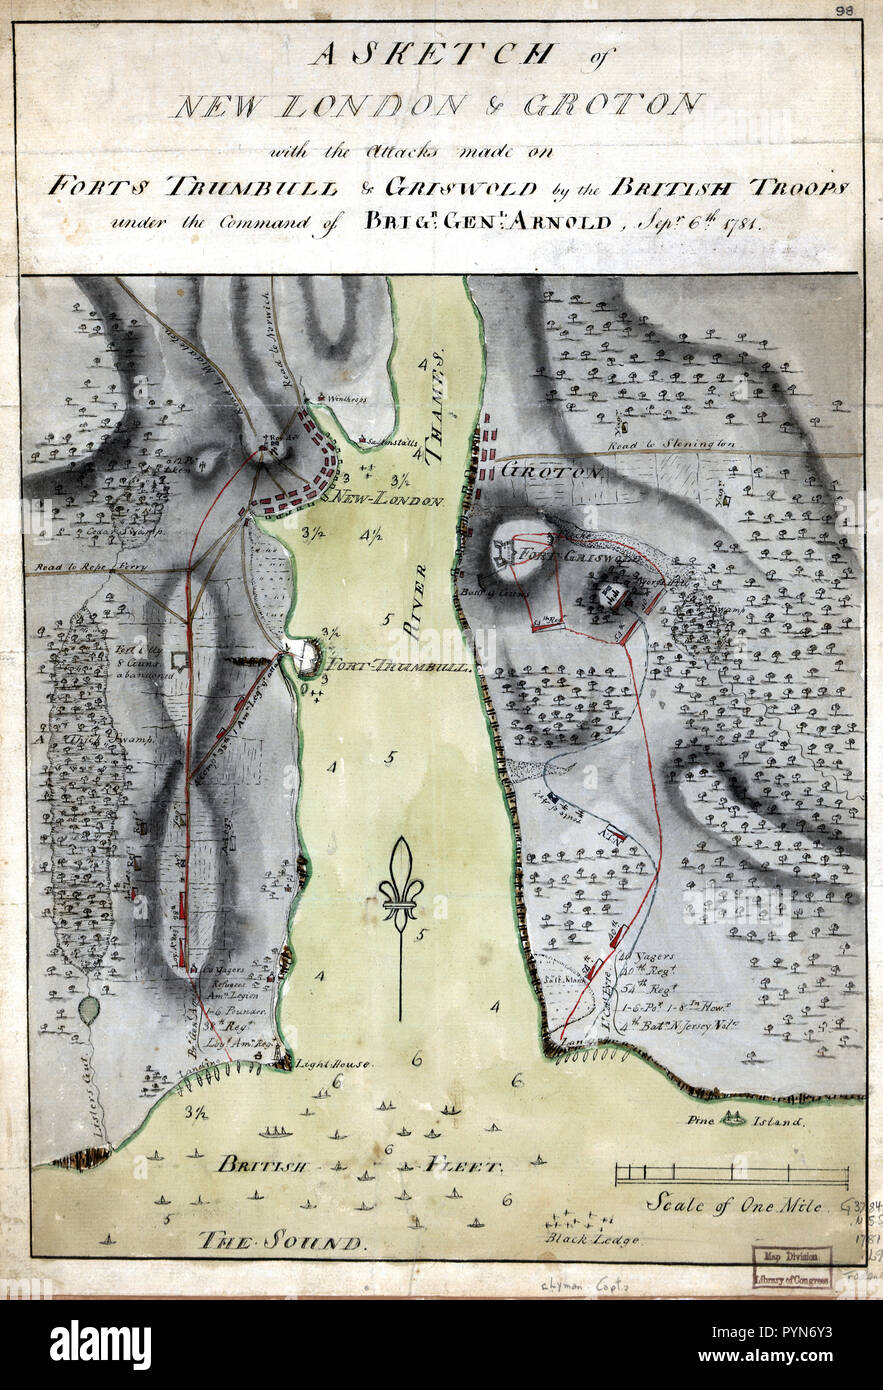 Vintage Maps / Antique Maps - A sketch of New London & Groton with the attacks made on Forts Trumbull & Griswold by the British troops under the command of Brigr. Genl. Arnold, Sept. 6th. 1781 Stock Photo